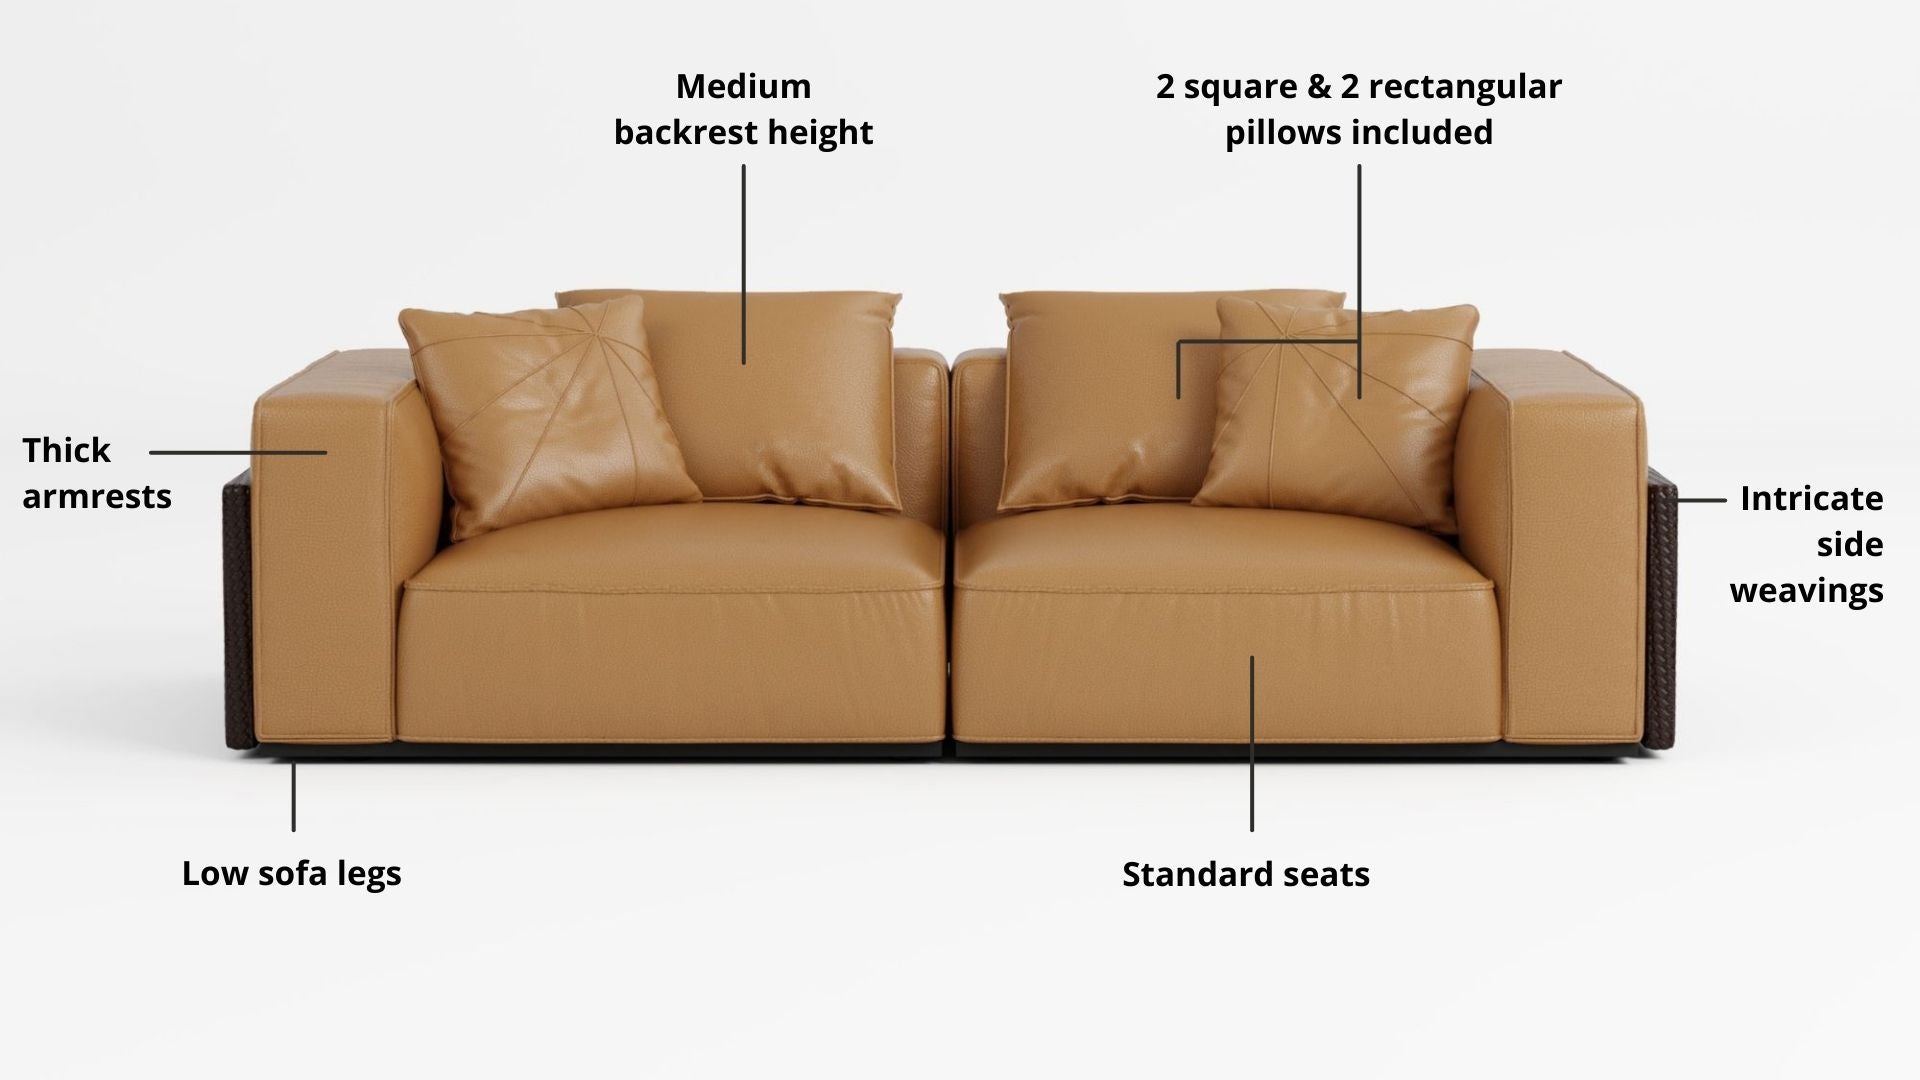 Key features such as armrest thickness, cushion height, seat depth and sofa leg height for Carson Half Leather Sofa